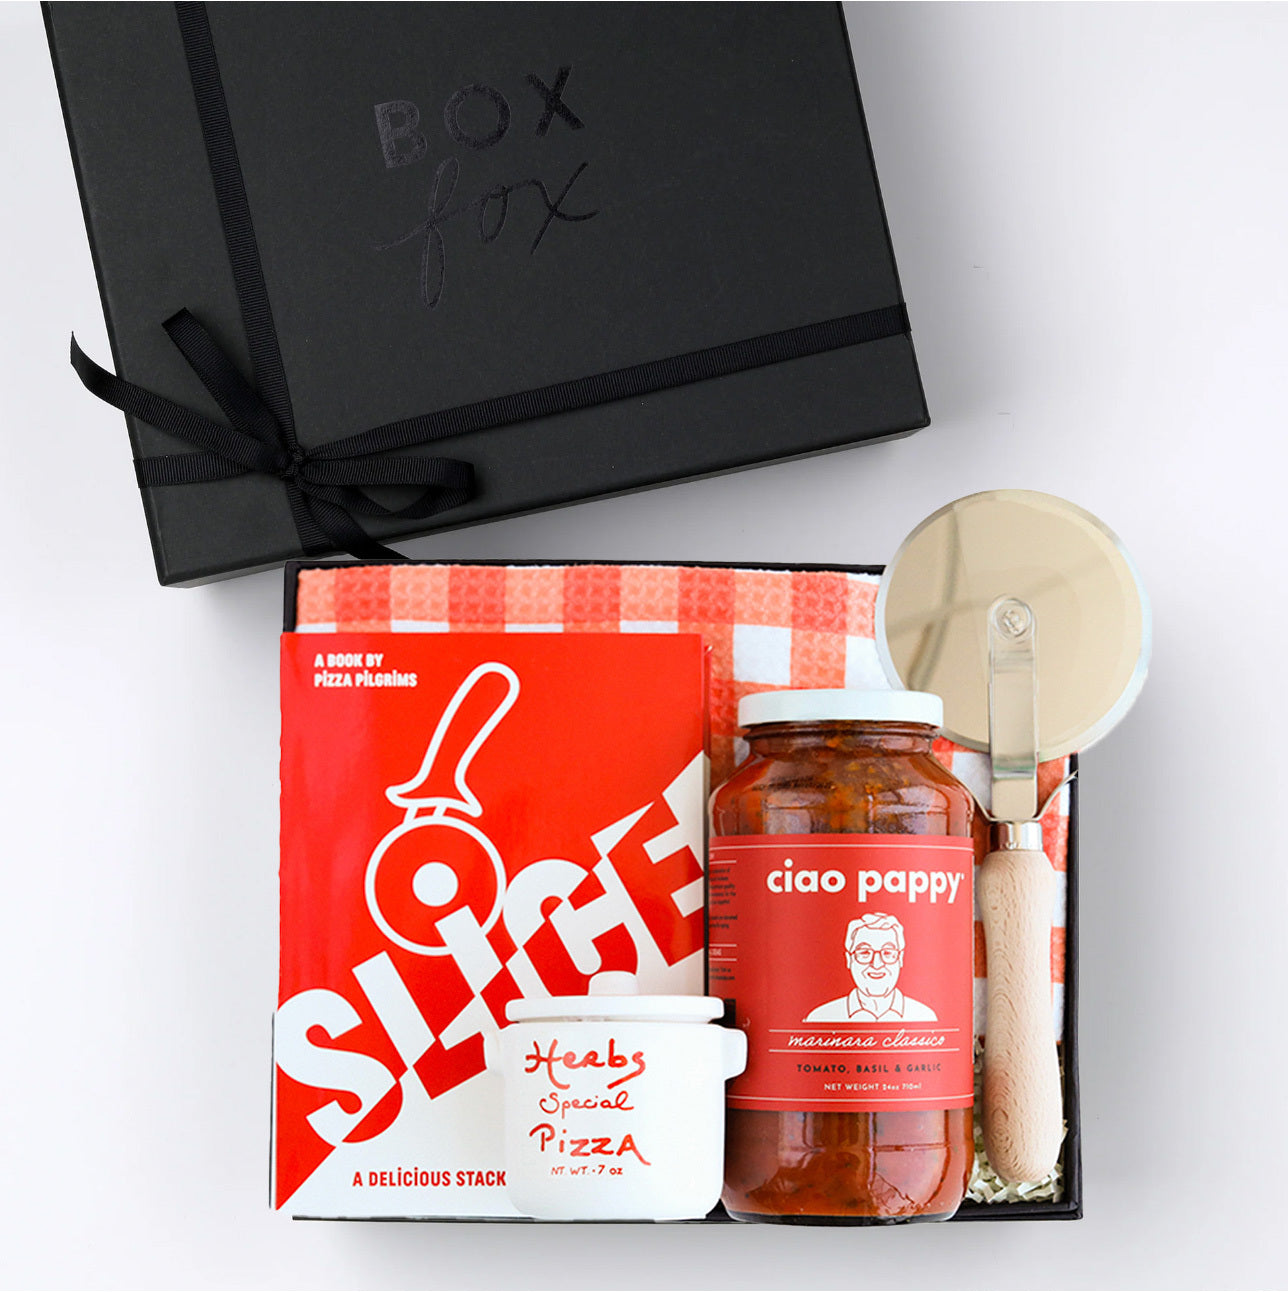 BOXFOX Black gift box packed with &quot;Slice&quot; Pizza book, wood pizza cutter, Ciao Pappy Marinara sauce, Pizza herbs jar and plaid red Geometry tea towel.